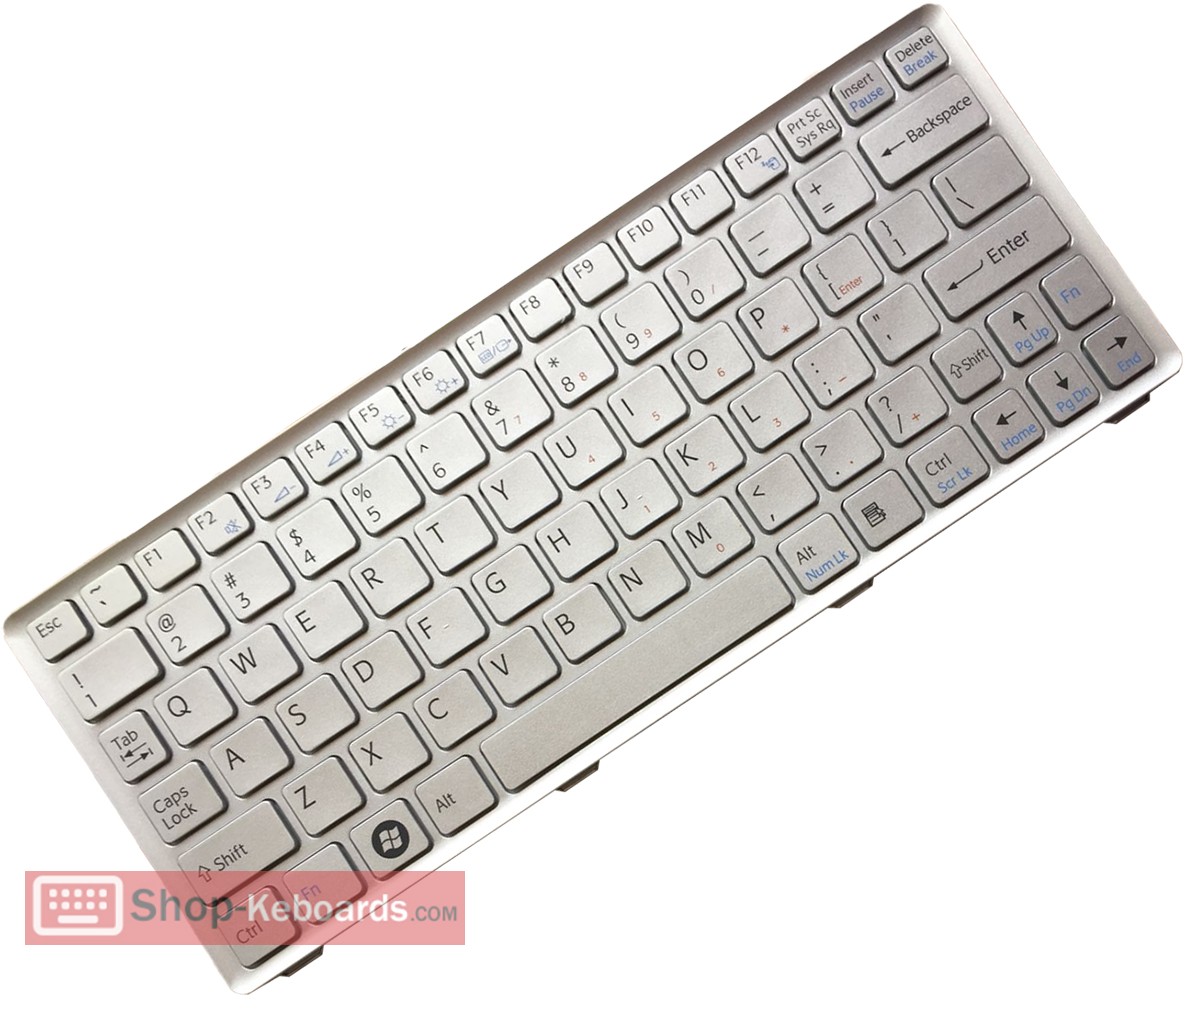 Sony Vaio VPC-W160ABT Keyboard replacement